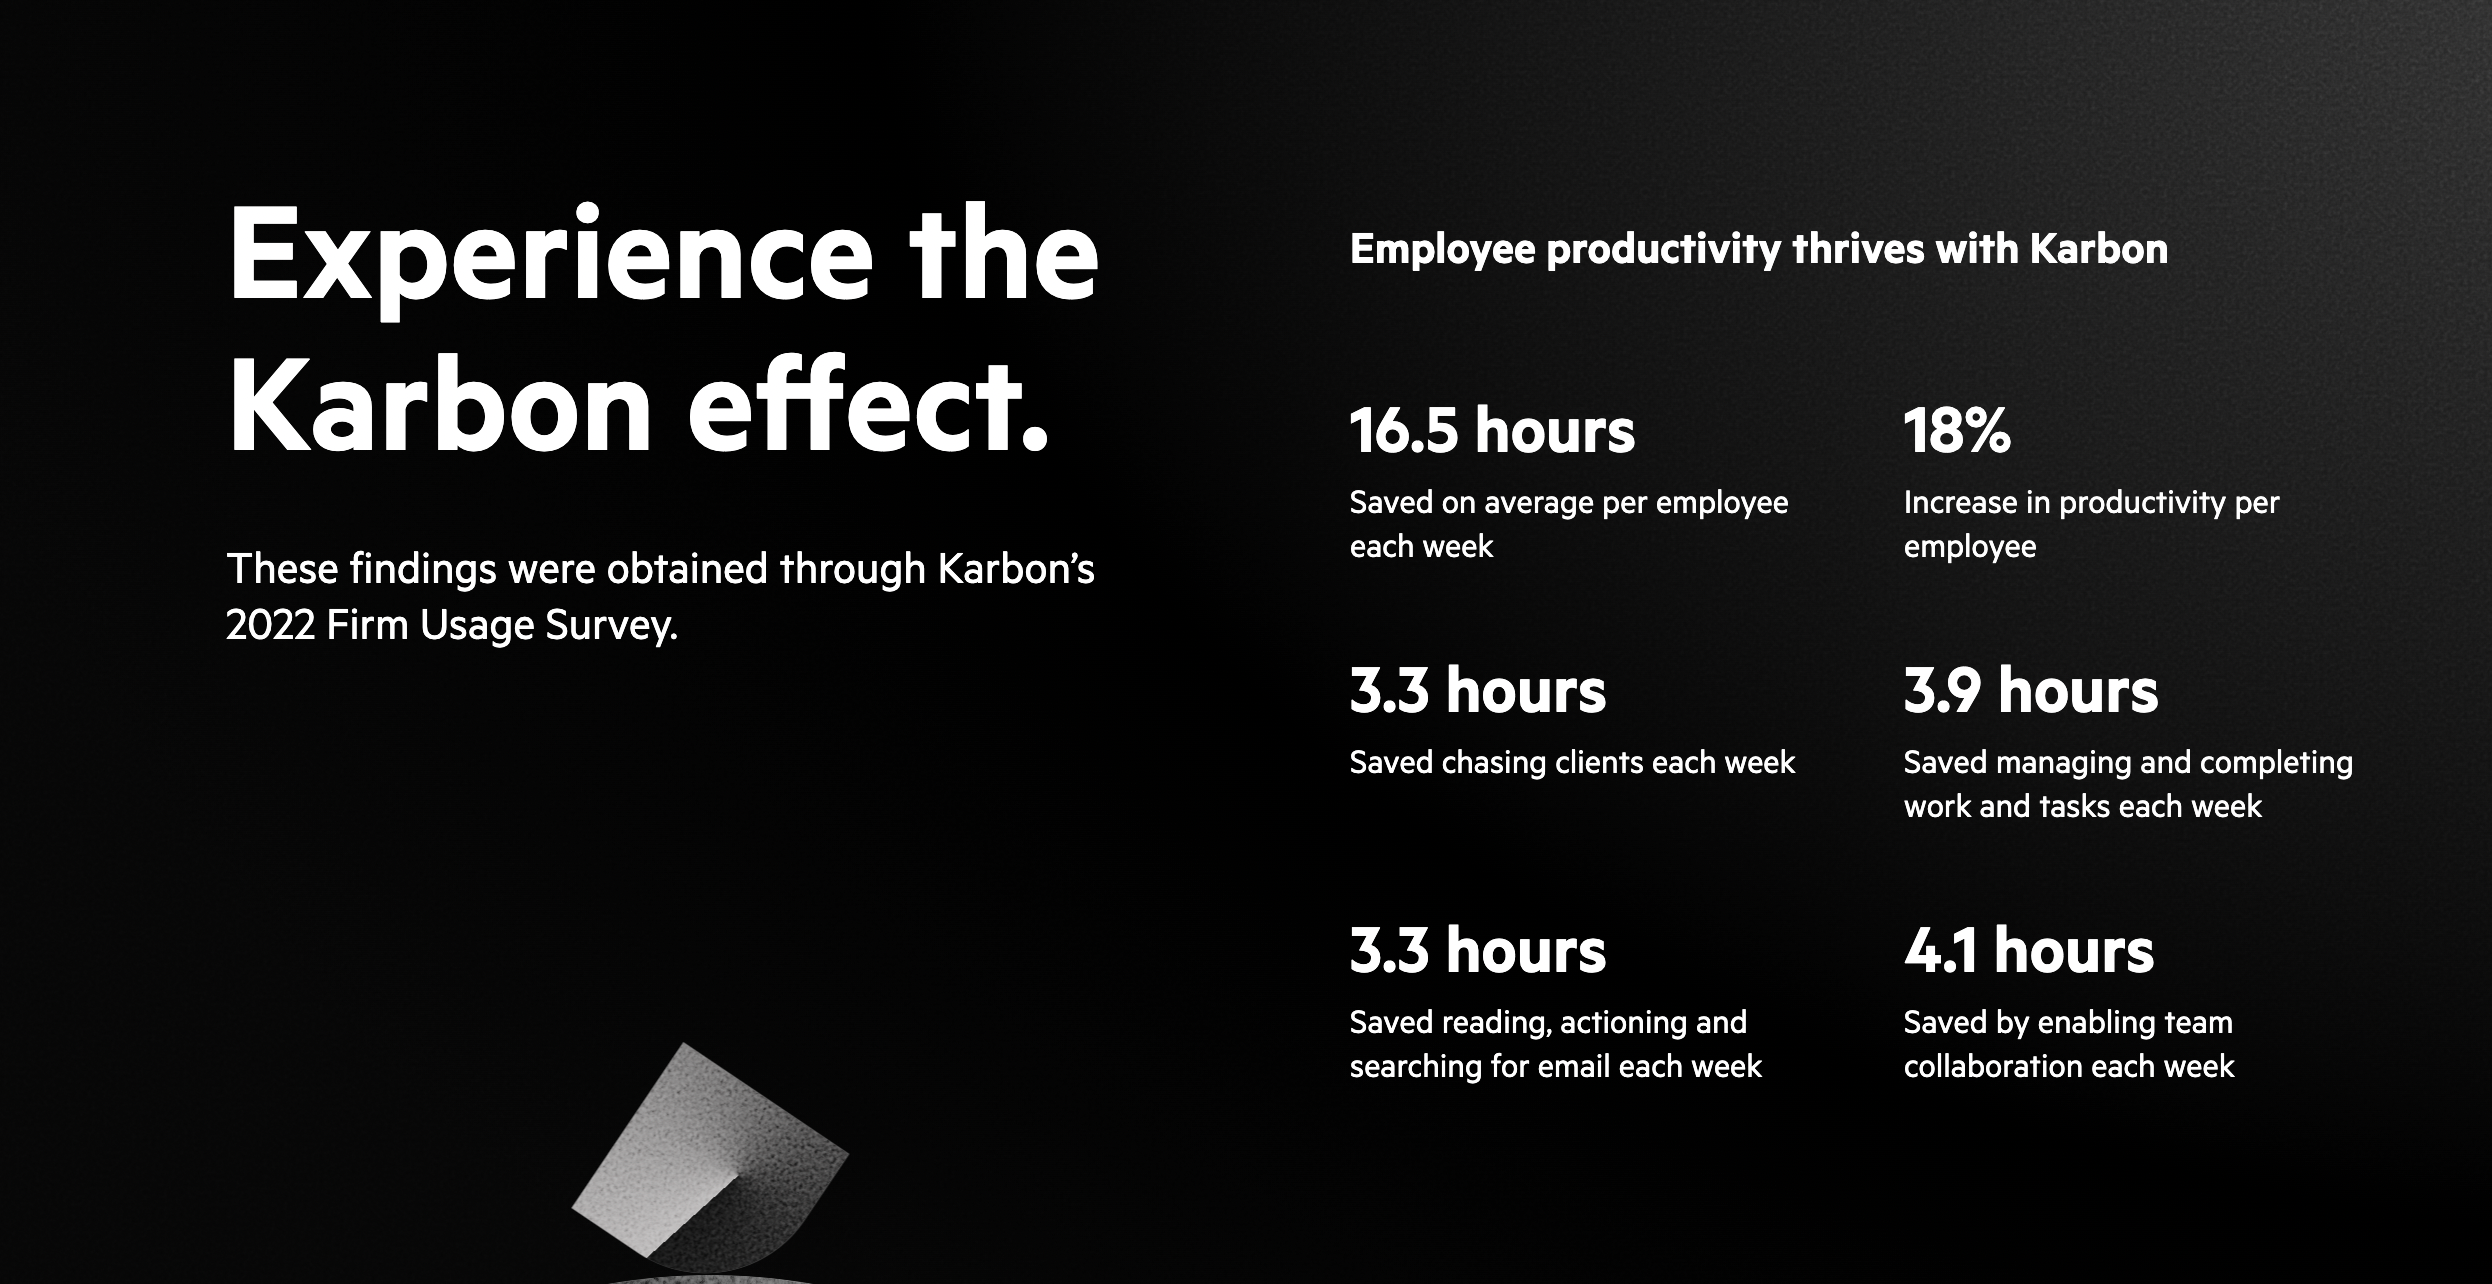 Accounting firms using Karbon for practice management save an average of 16.5 hours per employee each week.